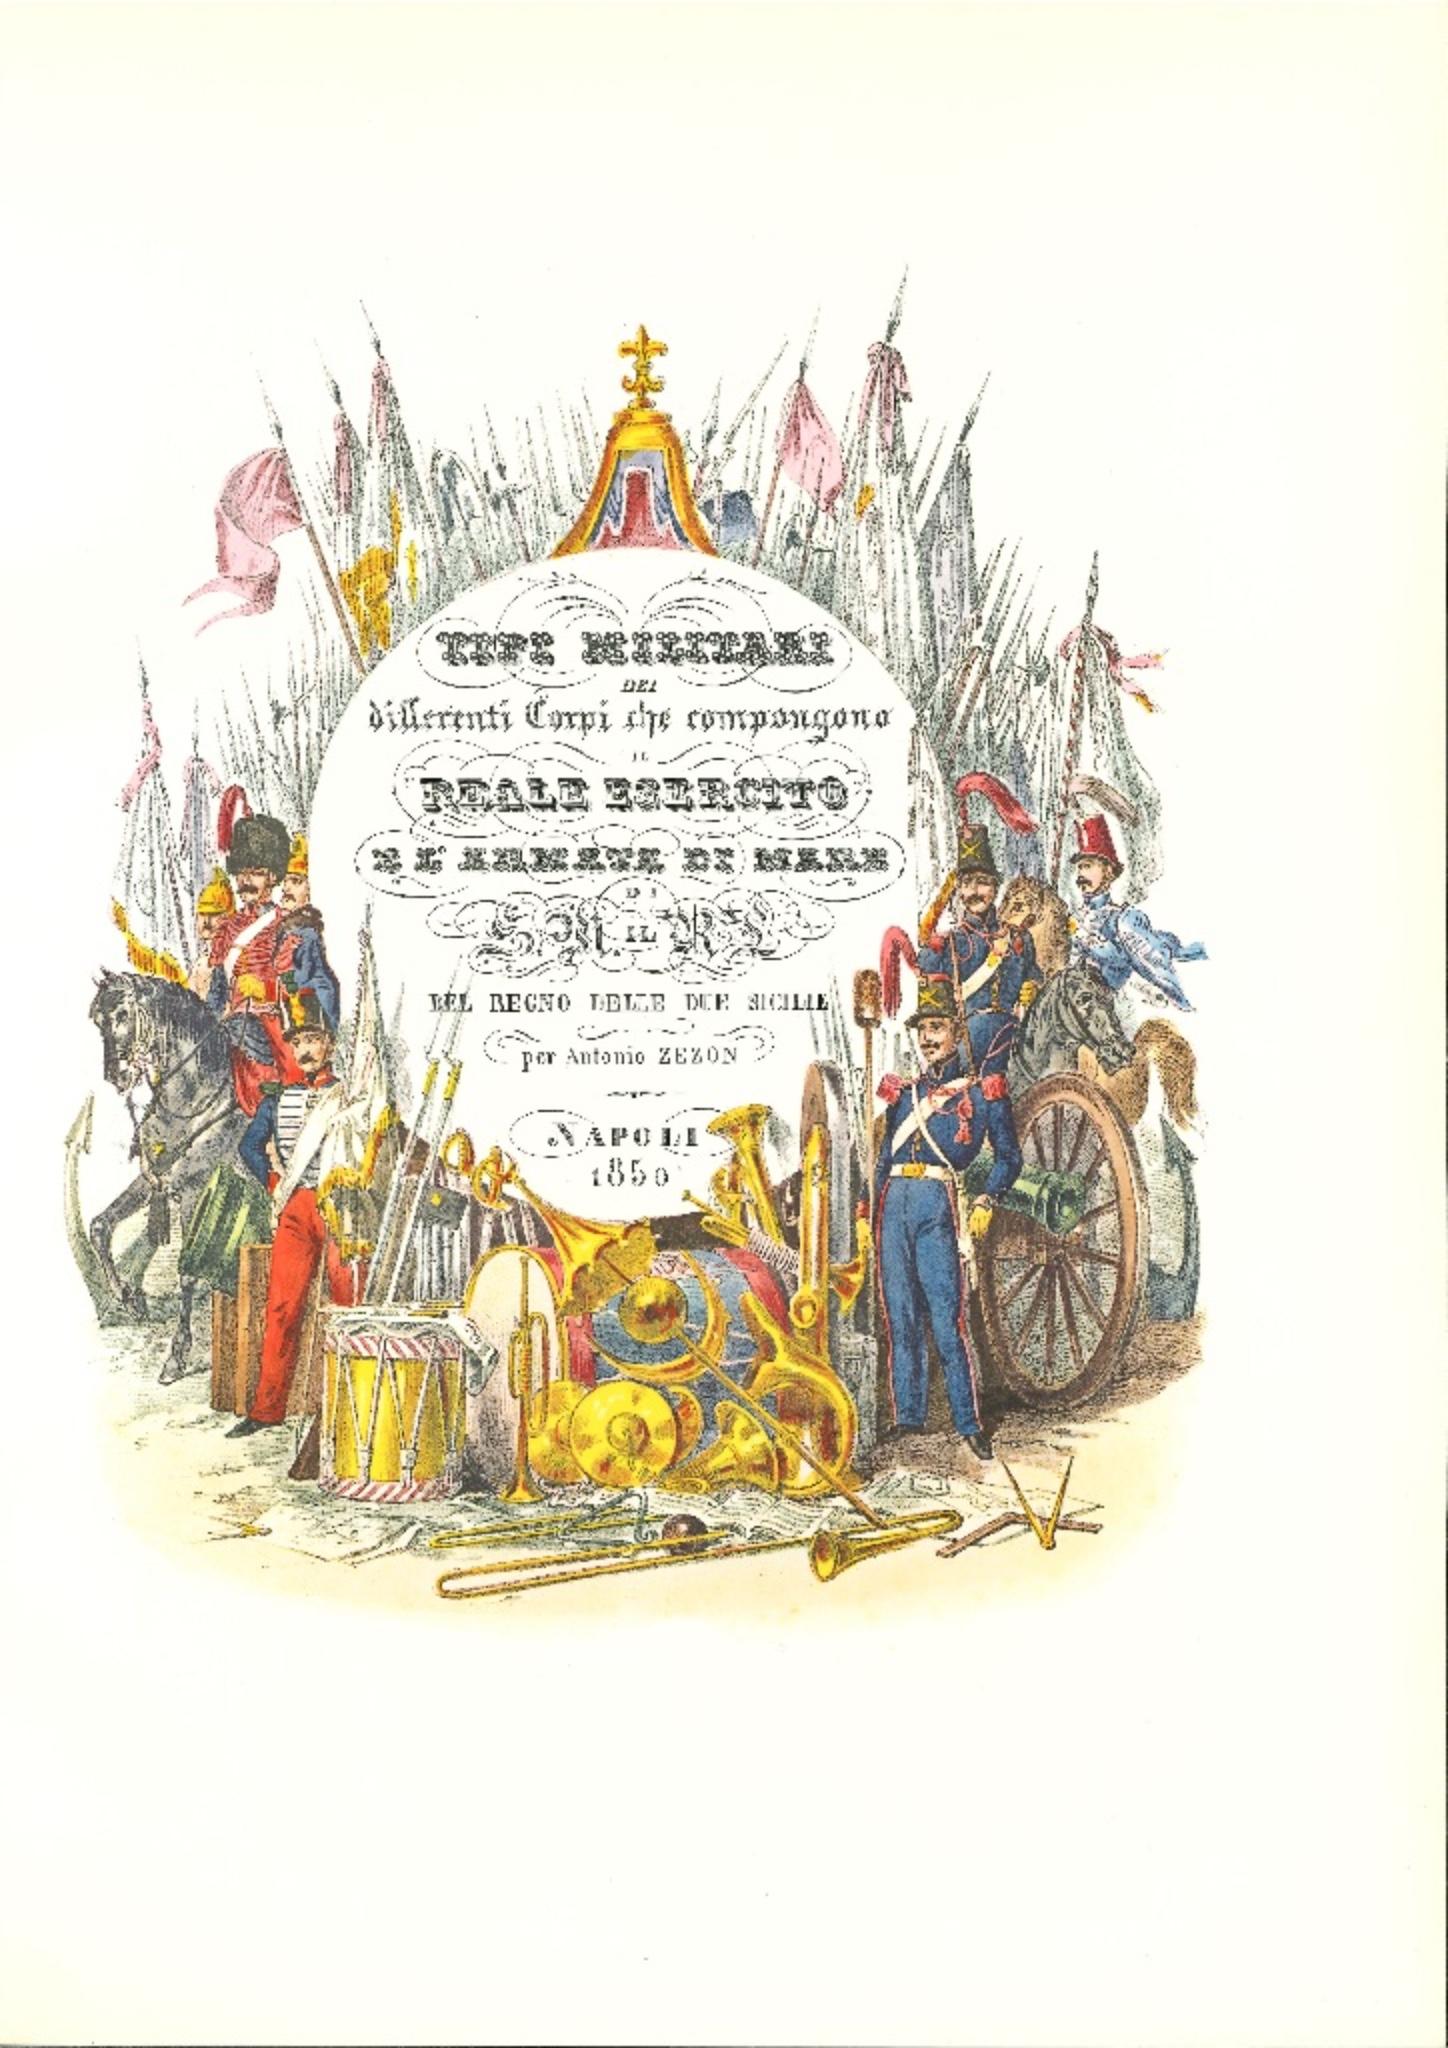 Frontispiece of "The Royal Army" is an original lithograph realized by Antonio Zezon. Naples,1850.

Interesting colored lithograph which describes the Royal Army, alongside with a Central inscription in the manner of a Slogan "TIPI MILITARI DEI